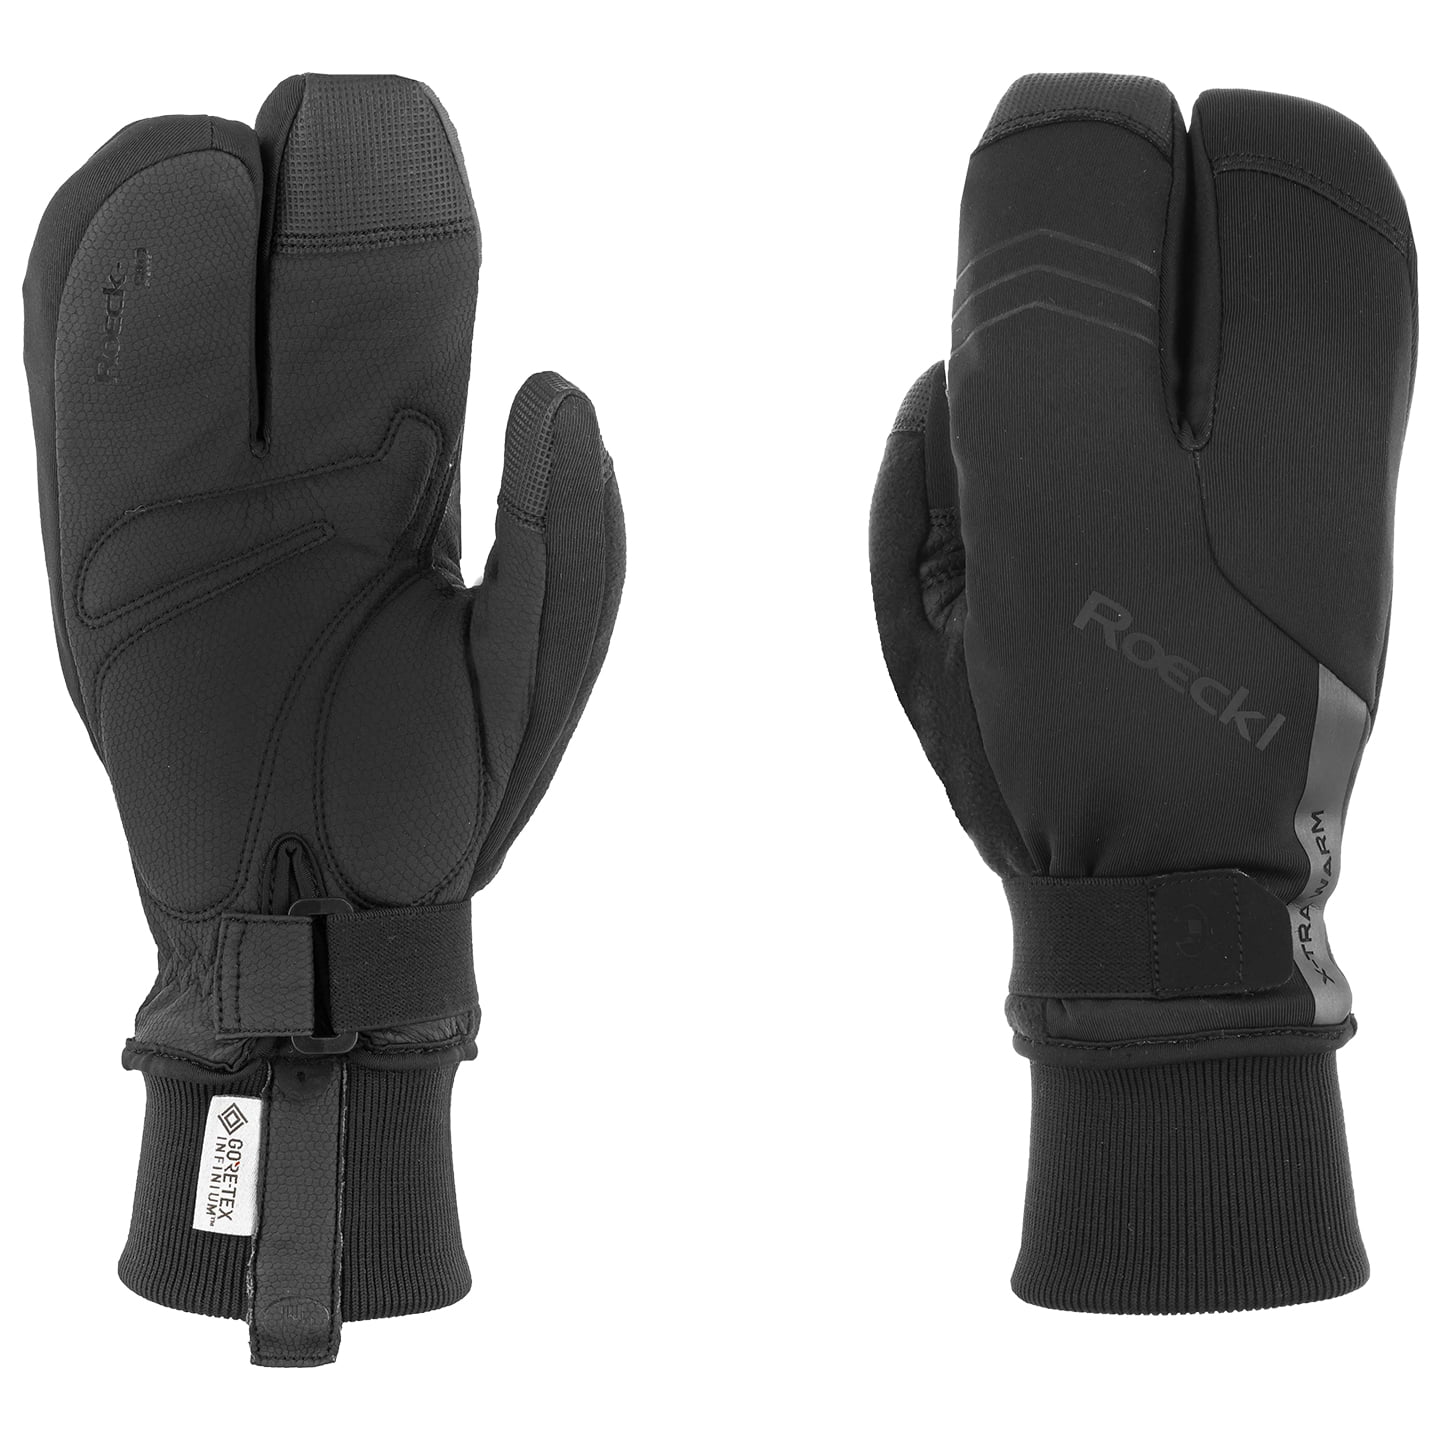 ROECKL Villach 2 Lobster Winter Gloves Winter Cycling Gloves, for men, size 10,5, Bike gloves, Bike clothing